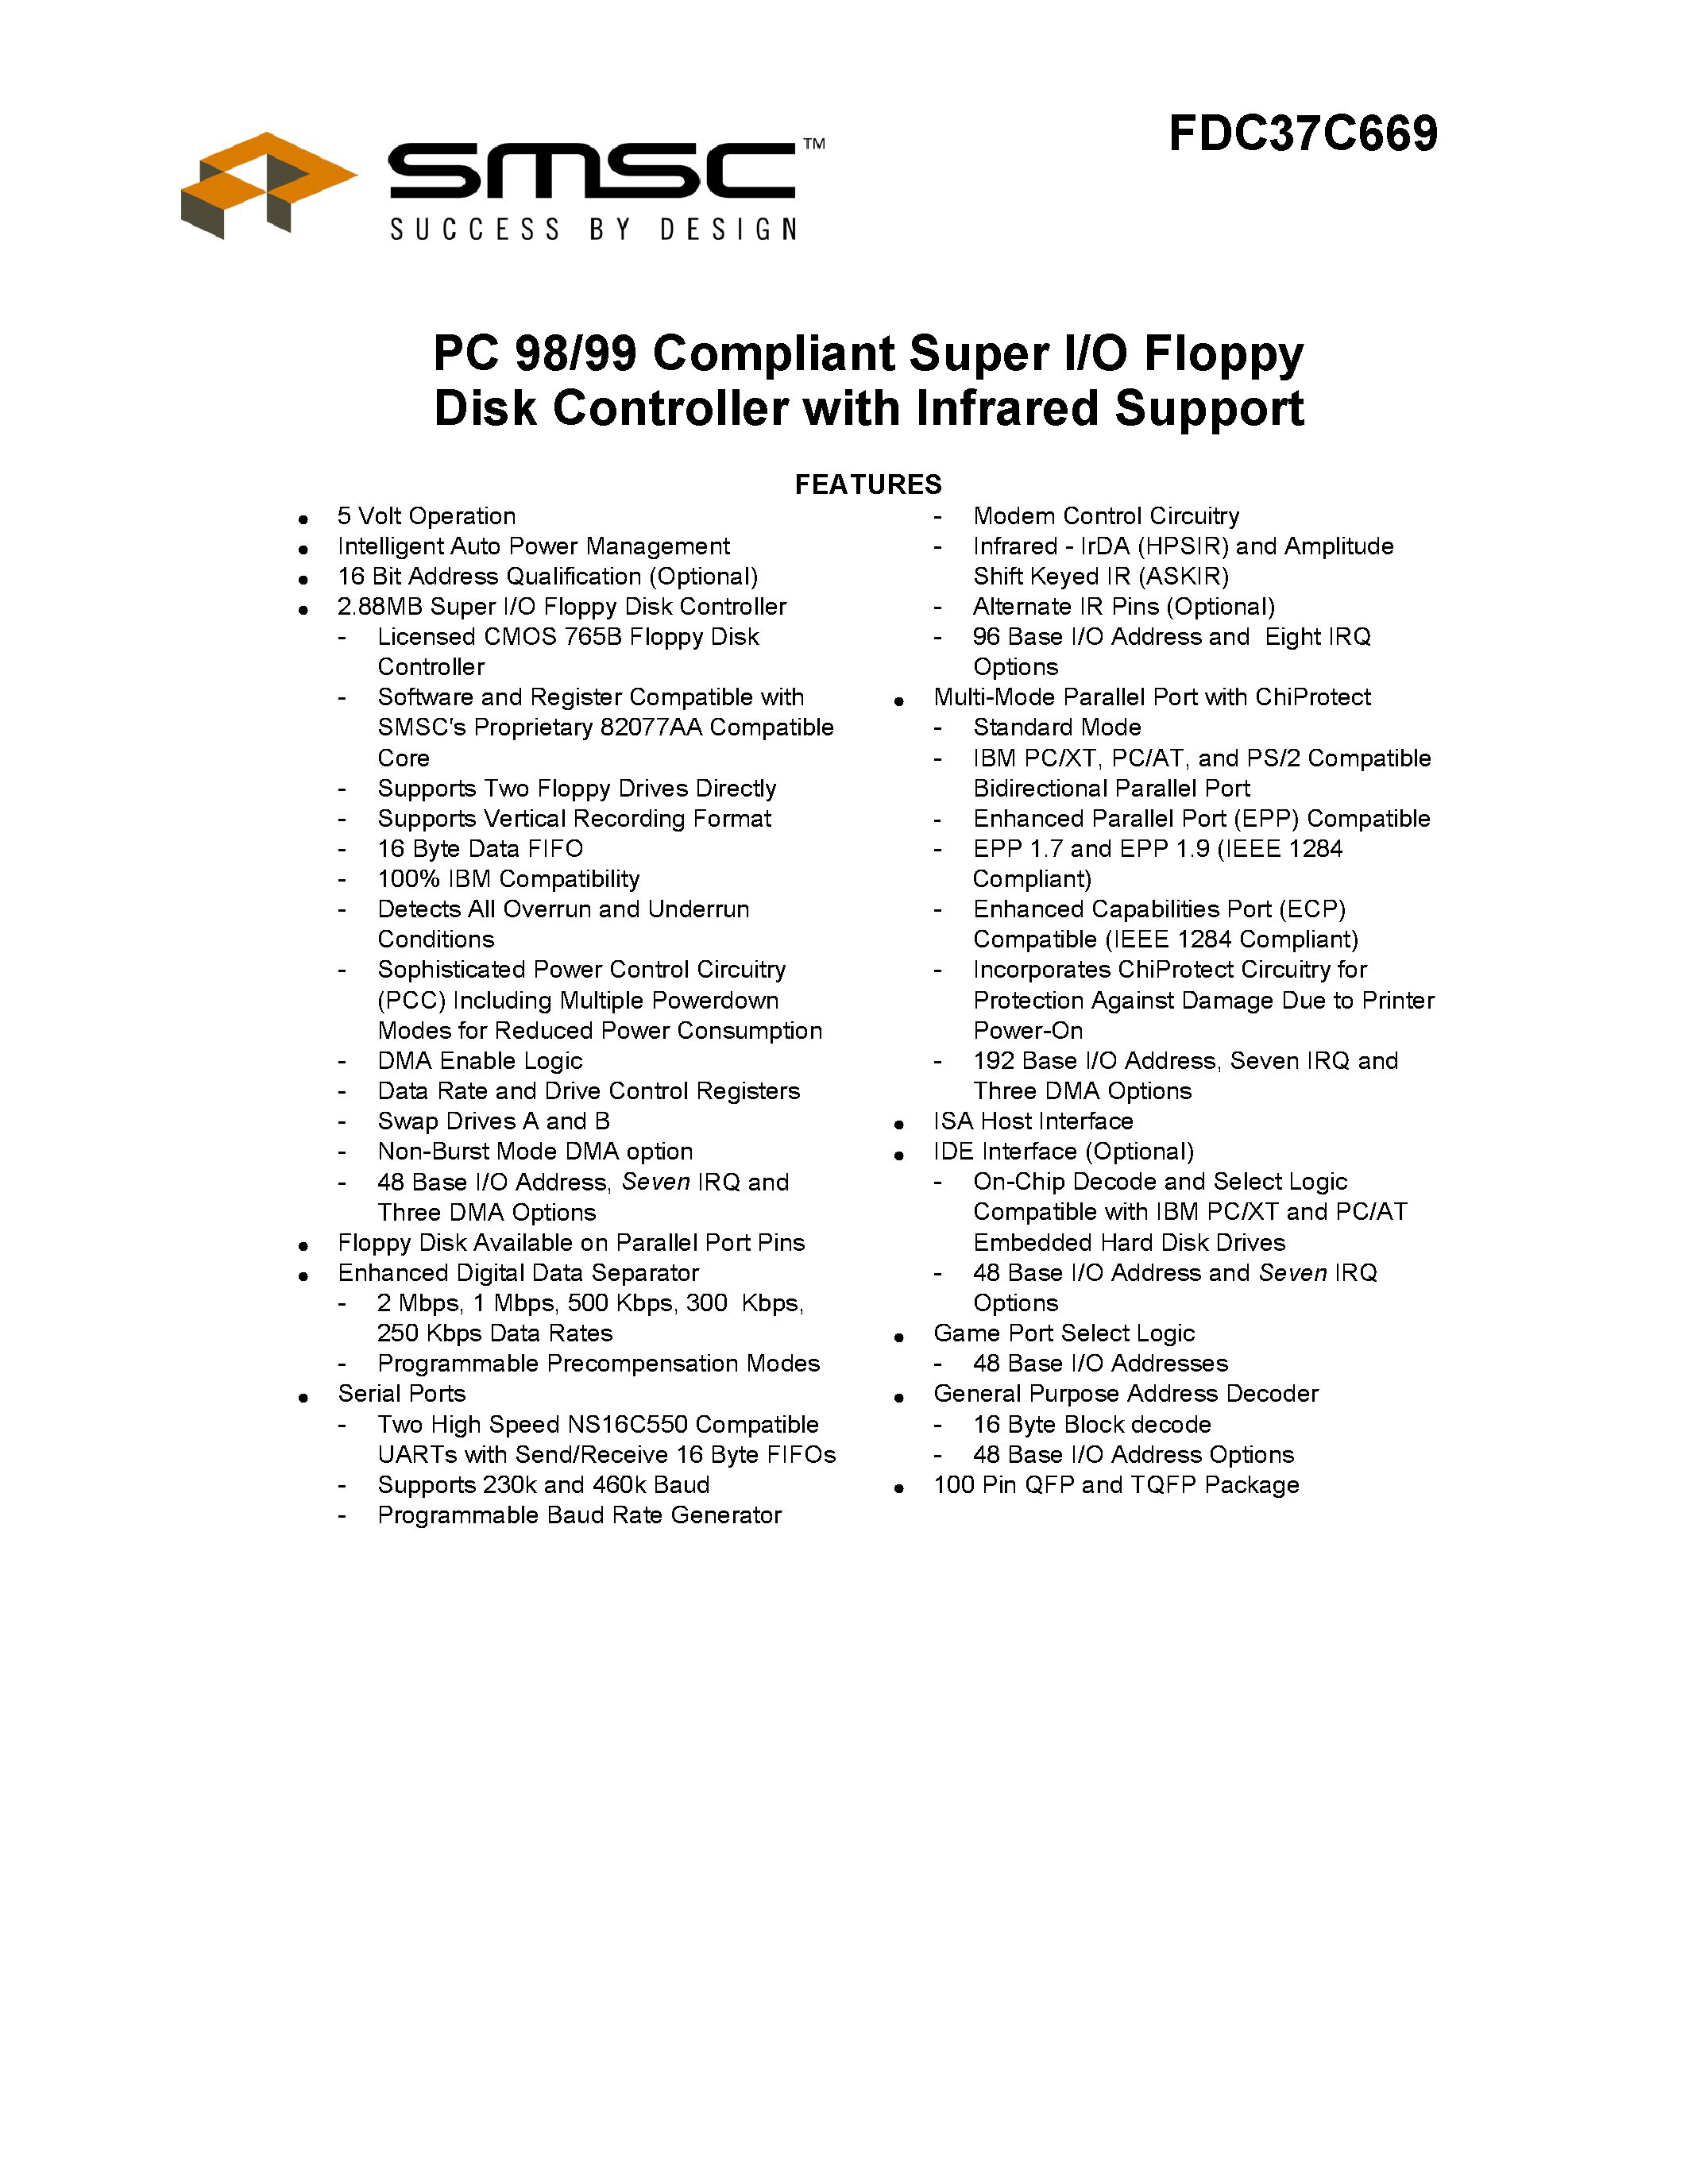 Datasheet 37C669 - PC 98/99 COMPLIANT SUPER I/O FLOPPY DISK CONTROLLER WITH INFRARED SUPPORT page 1